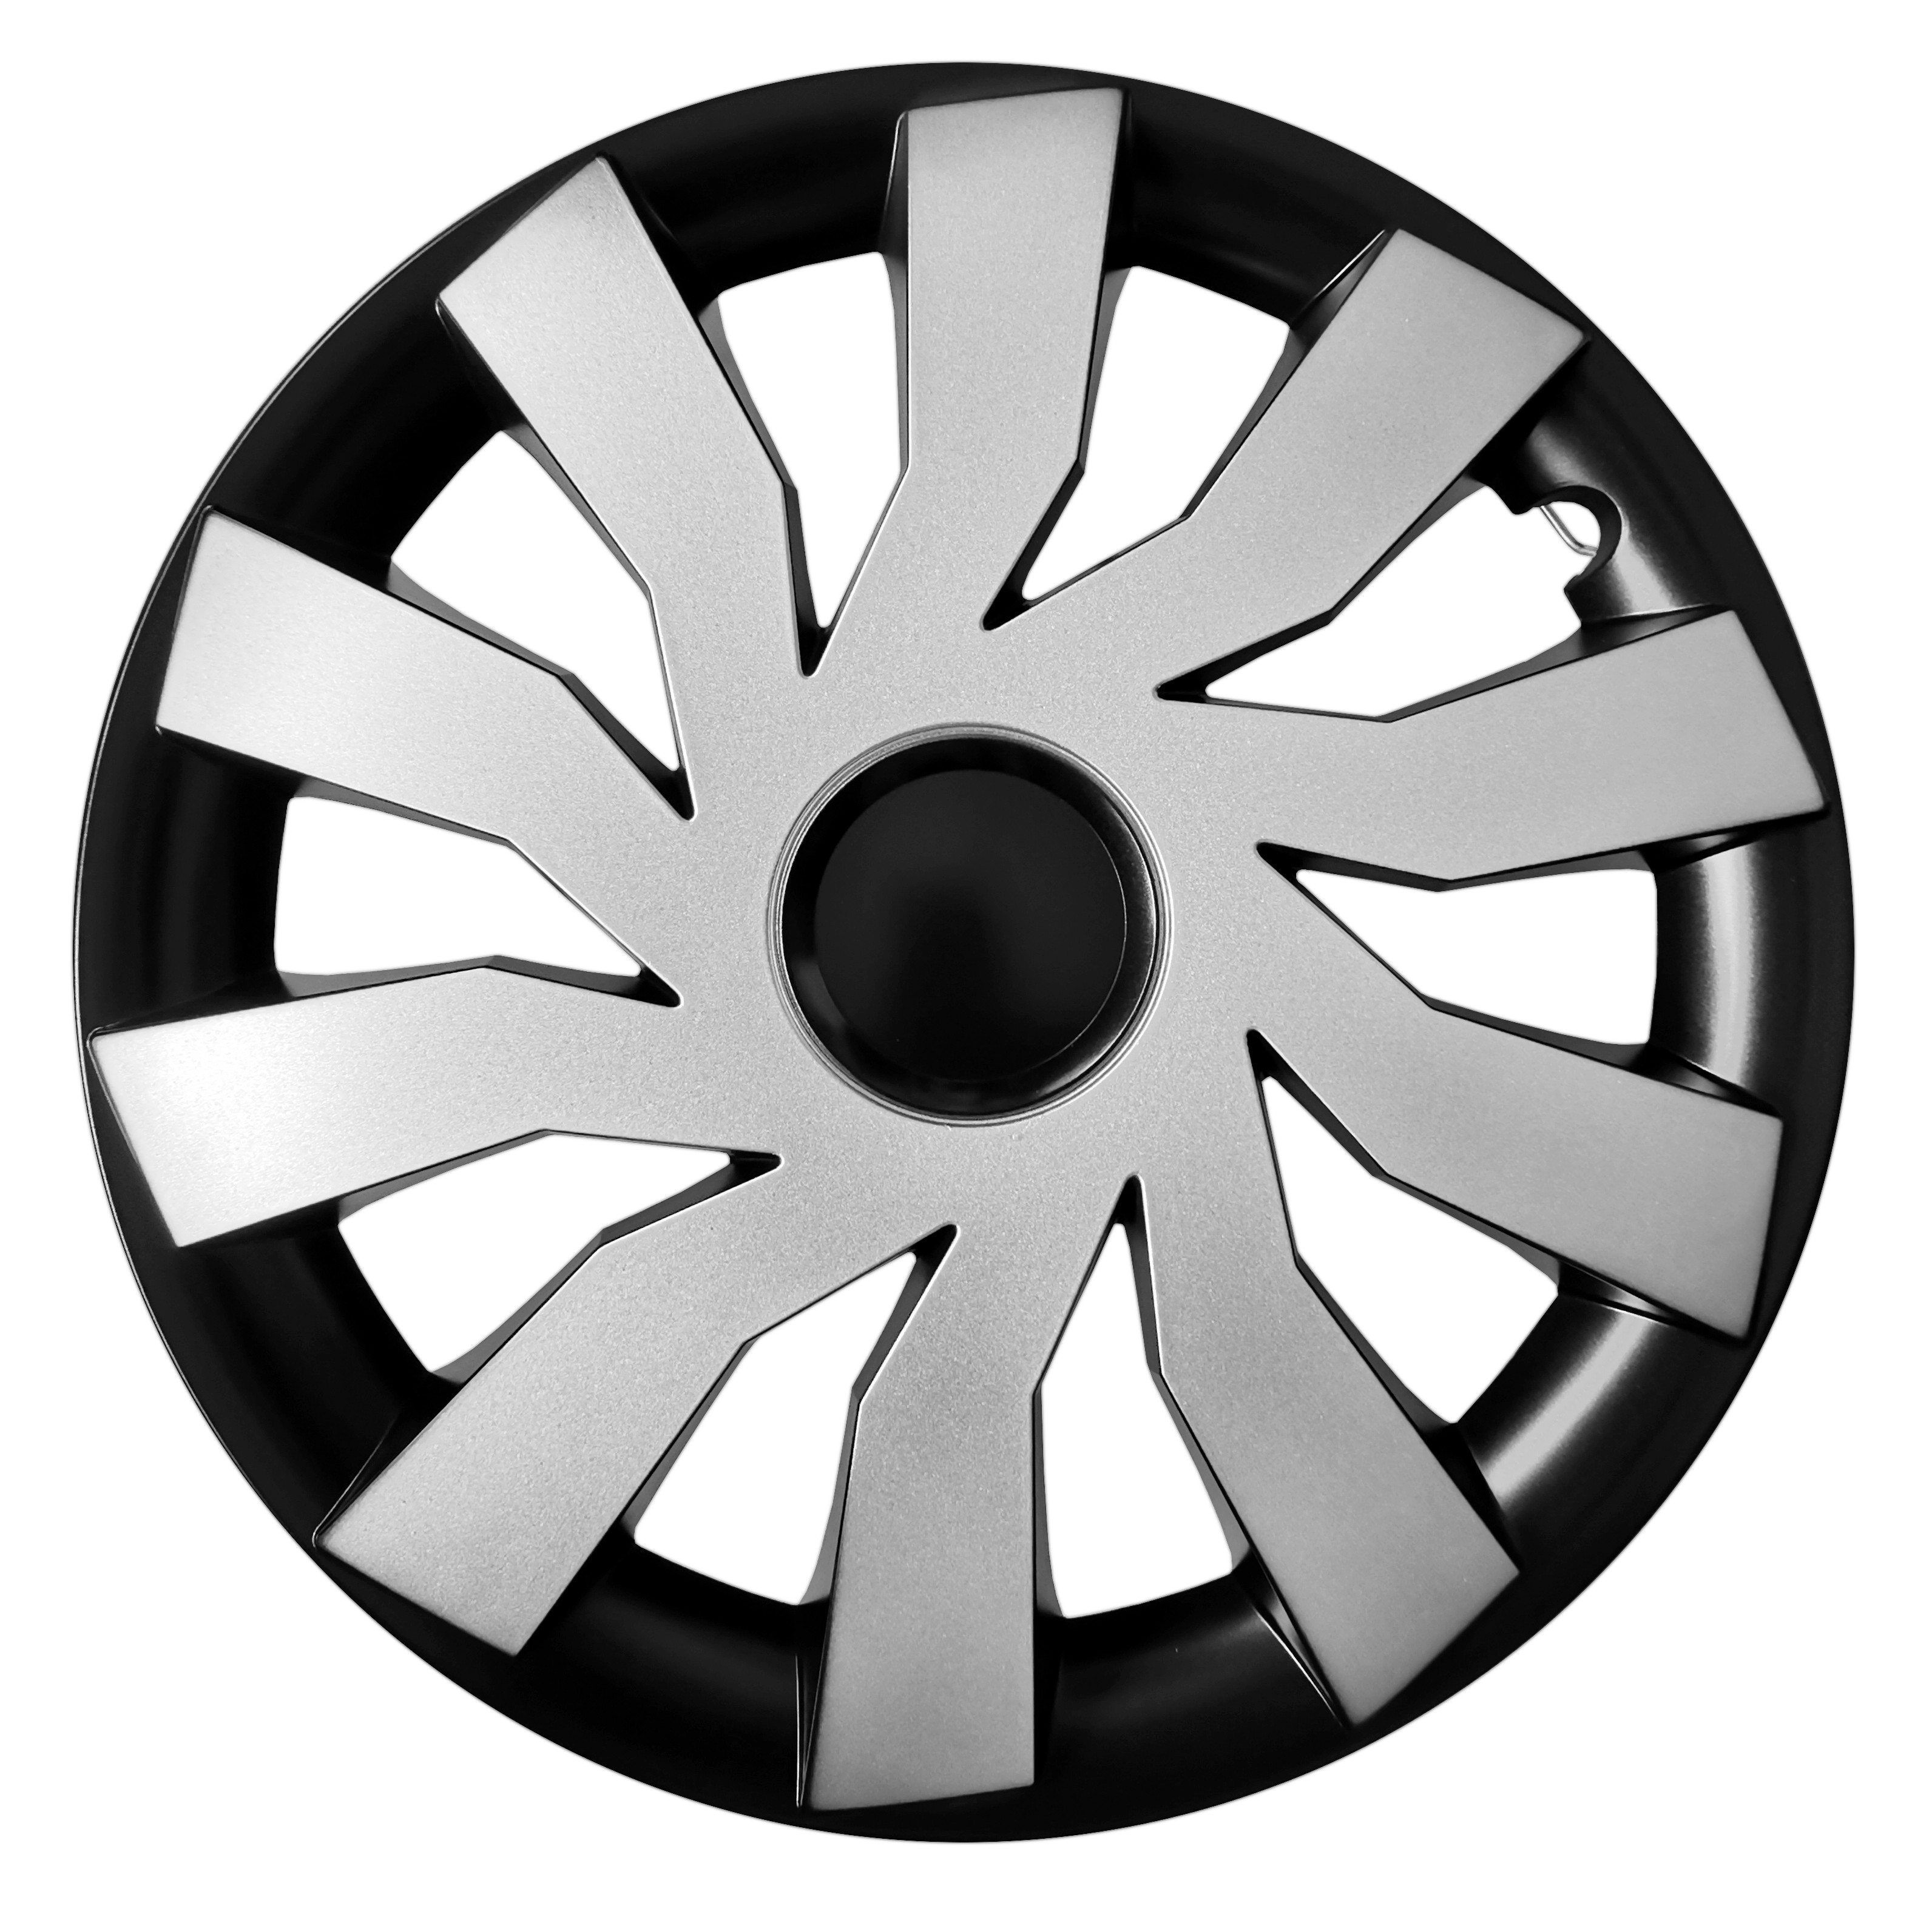 15" Wheel trims fit Vauxhall Corsa Astra Combo Zafira 4 x15 inches  silver